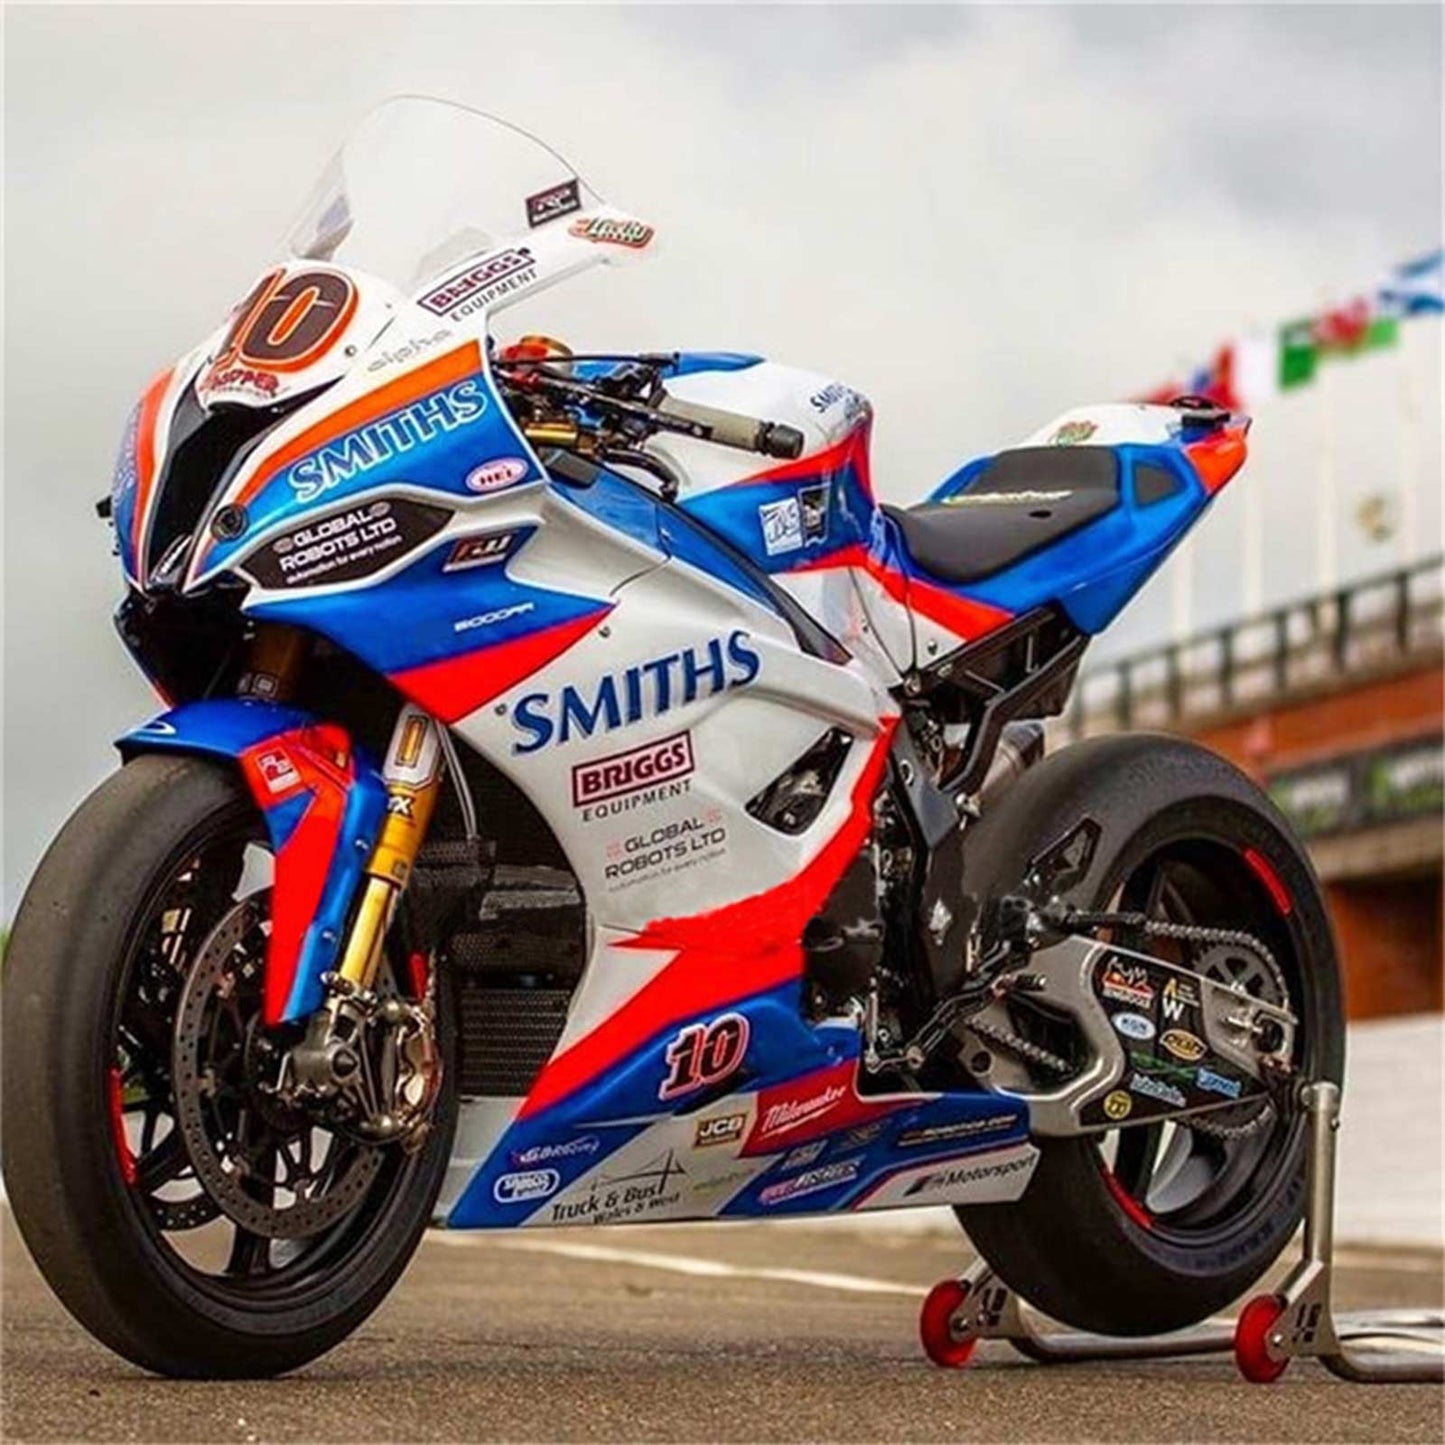 AMOTOPART 2019-2022 BMW S1000RR/M1000RR White Blue Red Racing Kiting Racing Kit